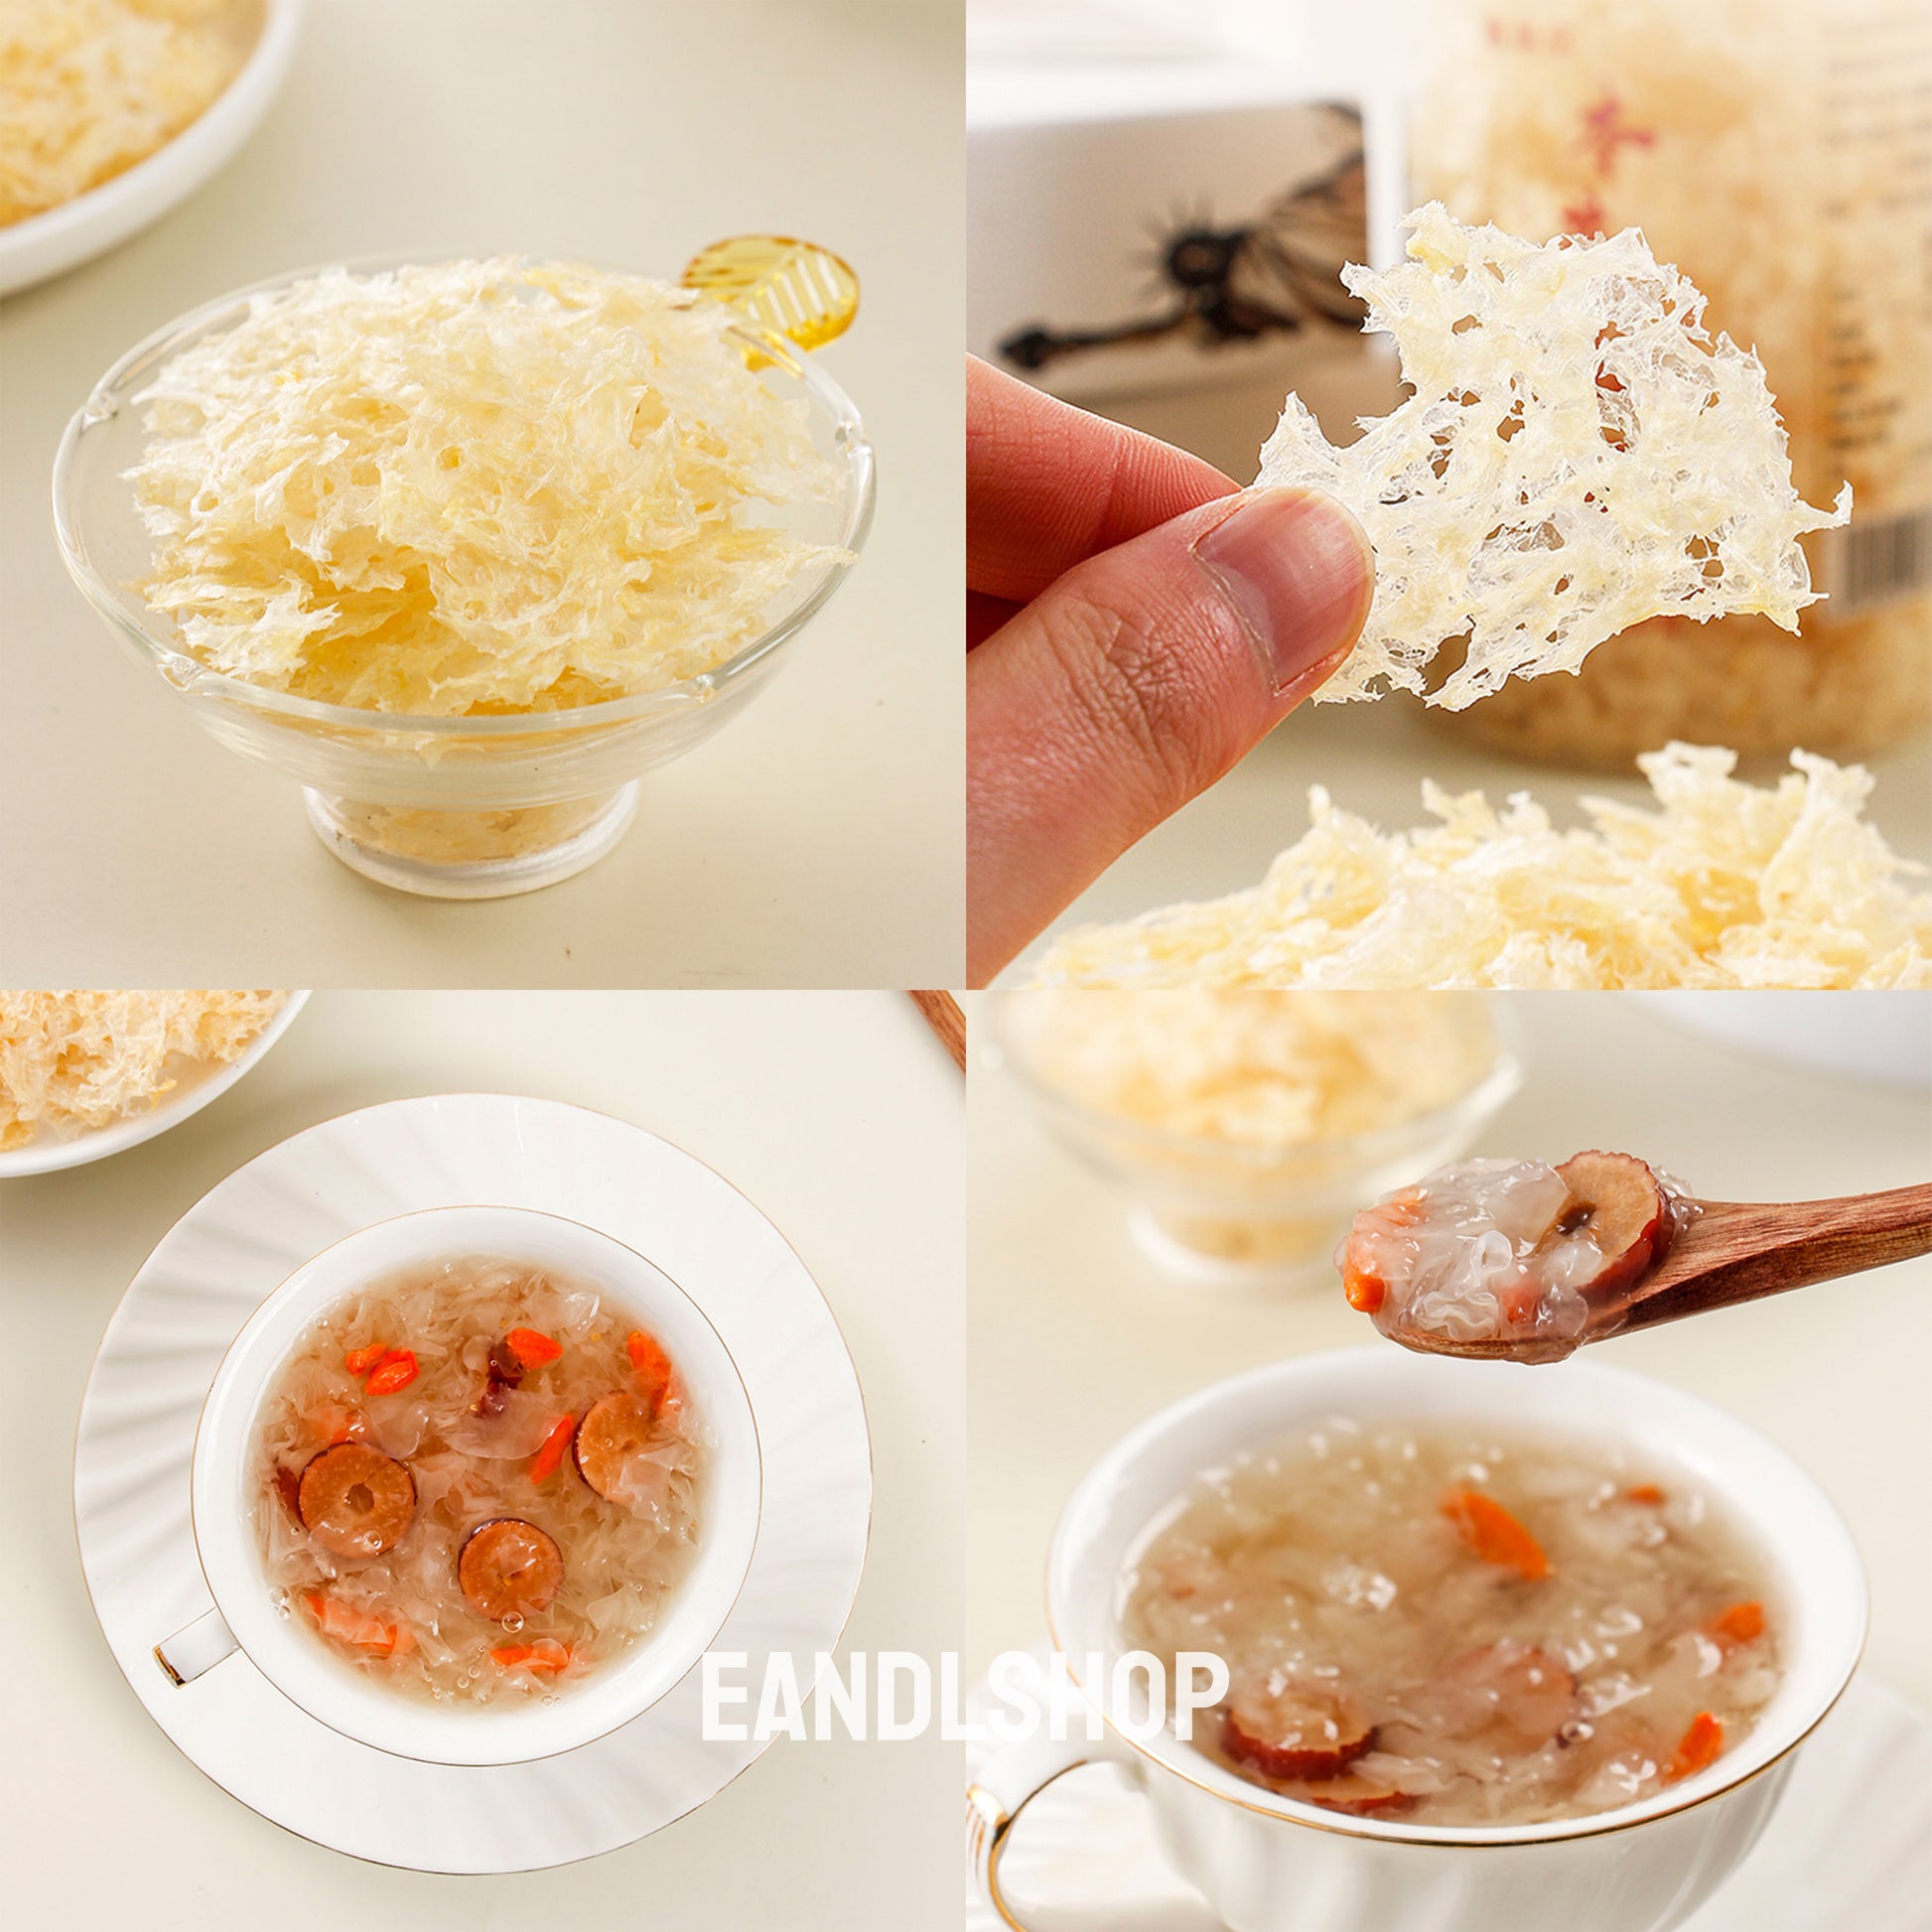 Tremella White Fungus. Old-school biscuits, modern snacks (chips, crackers), cakes, gummies, plums, dried fruits, nuts, herbal tea – available at www.EANDLSHOP.com